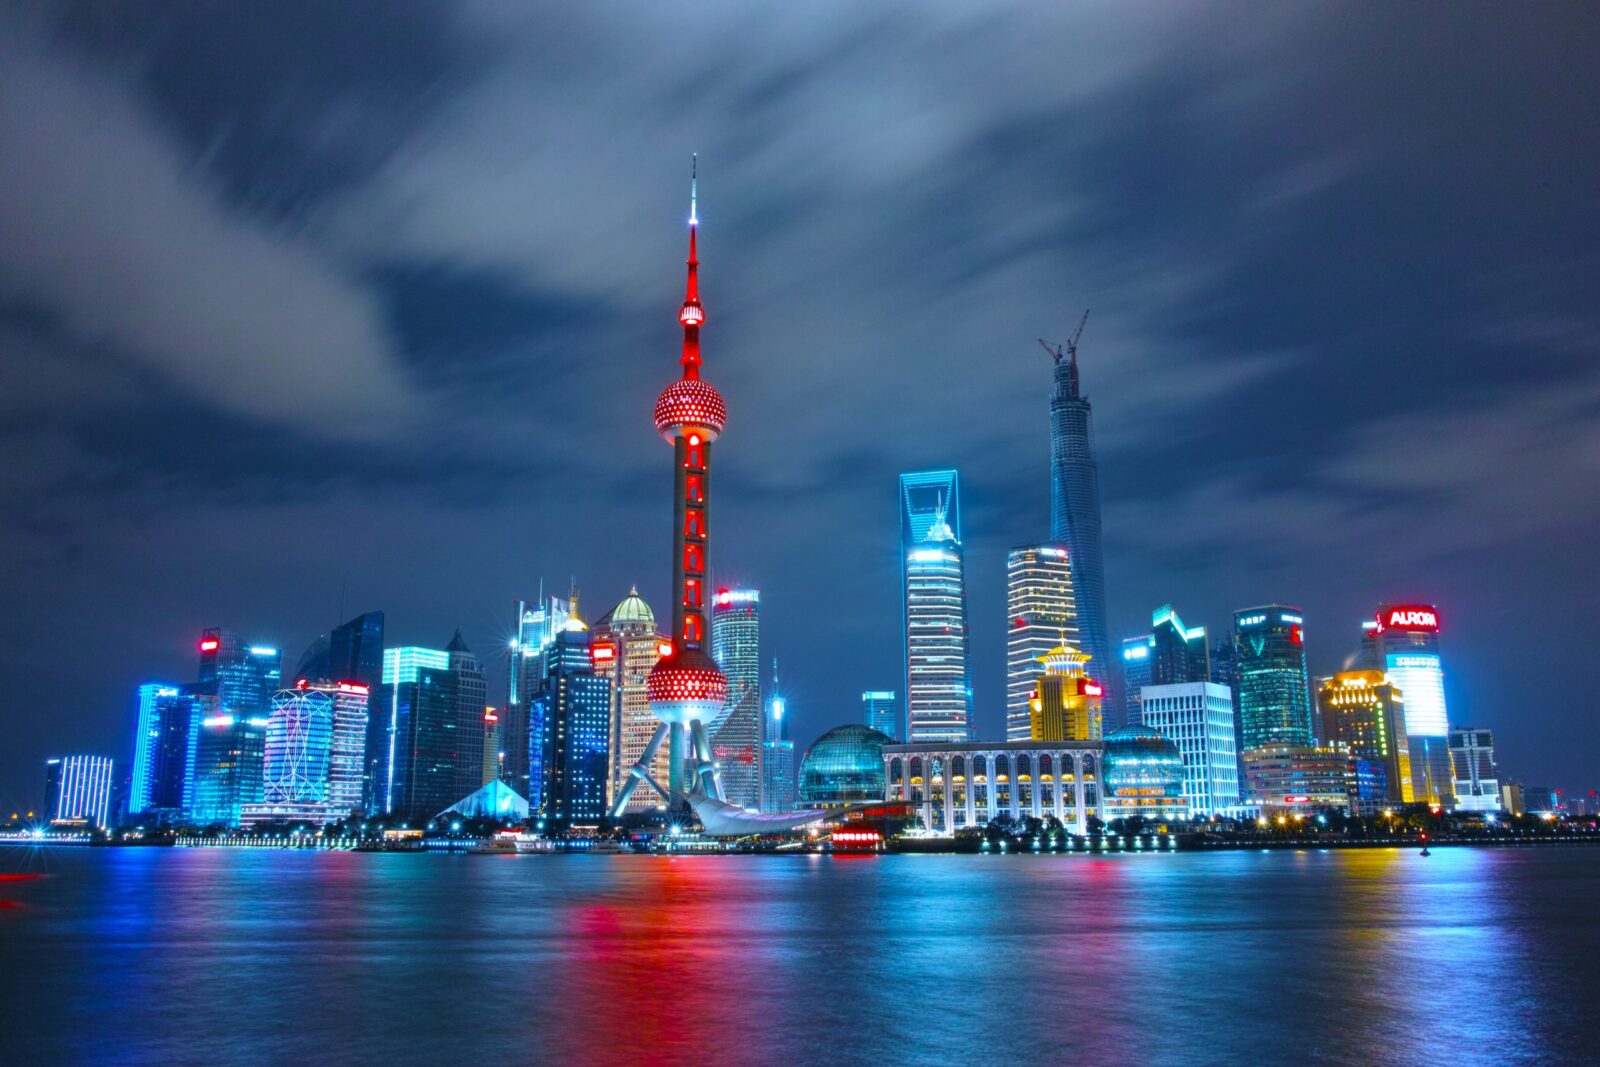 city landscape of china blue and red glow over water